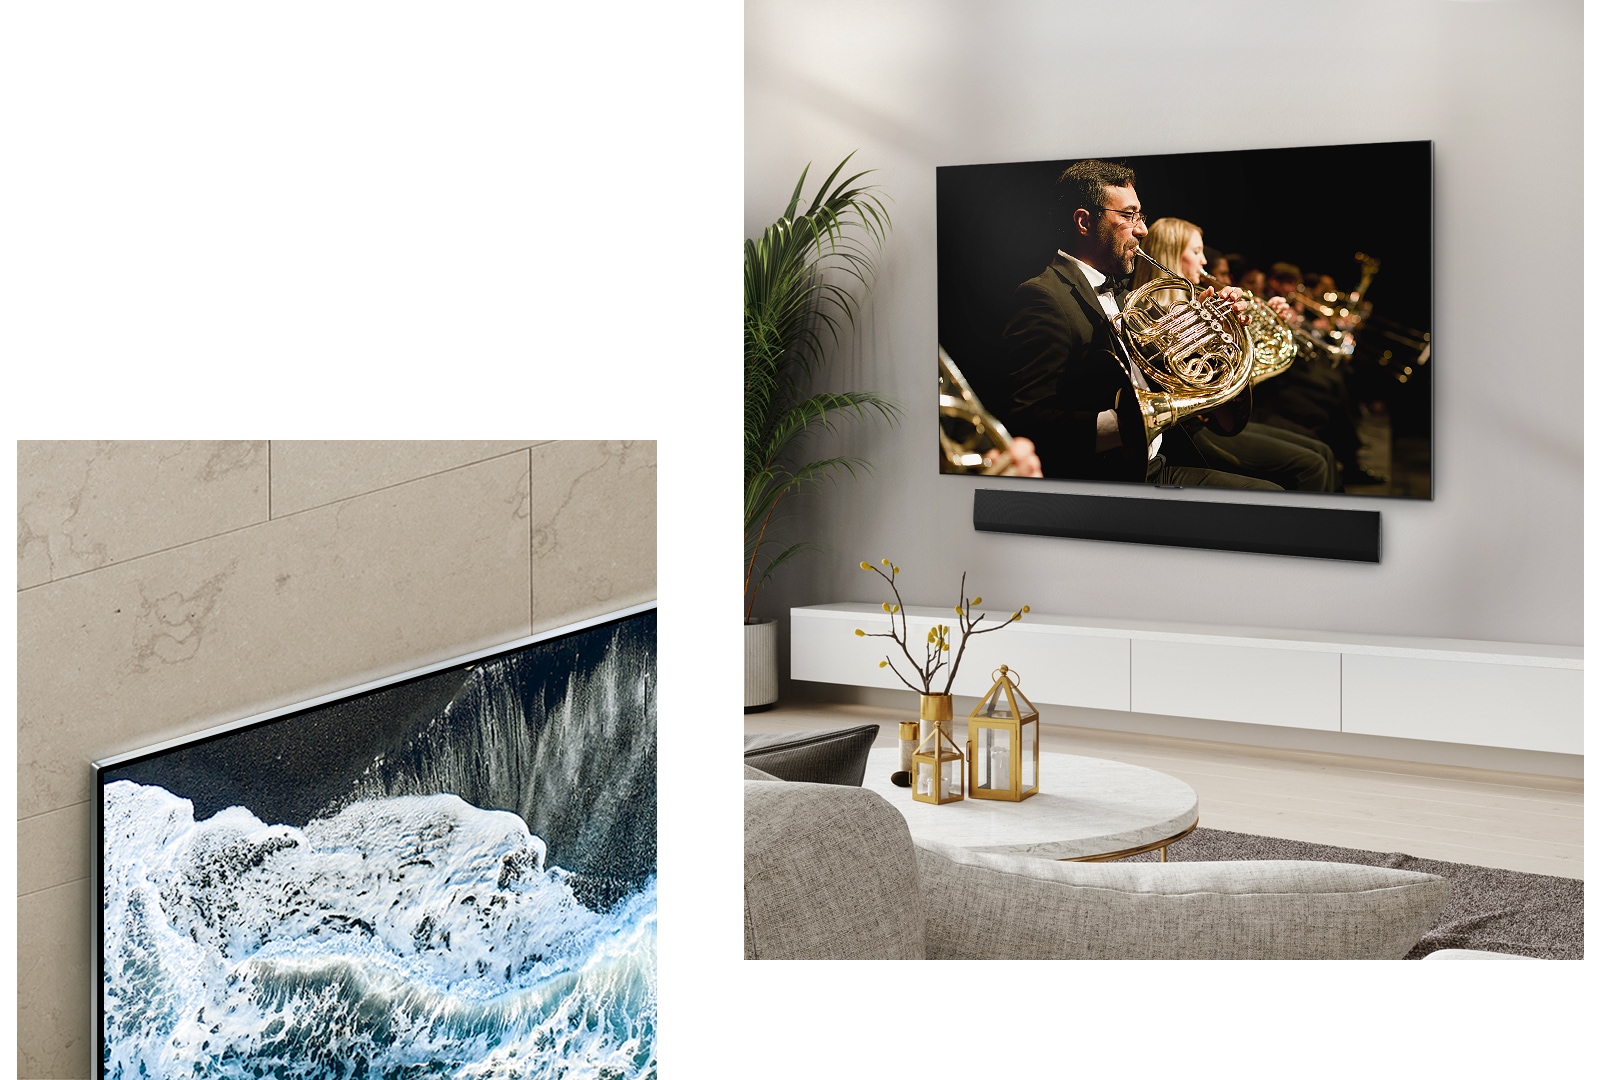 LG OLED TV, OLED G4 within an angled of perspective against a marbled wall showing how it merges against the wall.   LG OLED TV, OLED G4 and an LG Soundbar in a clean living space flat against the wall with an orchestral performance playing on screen. 